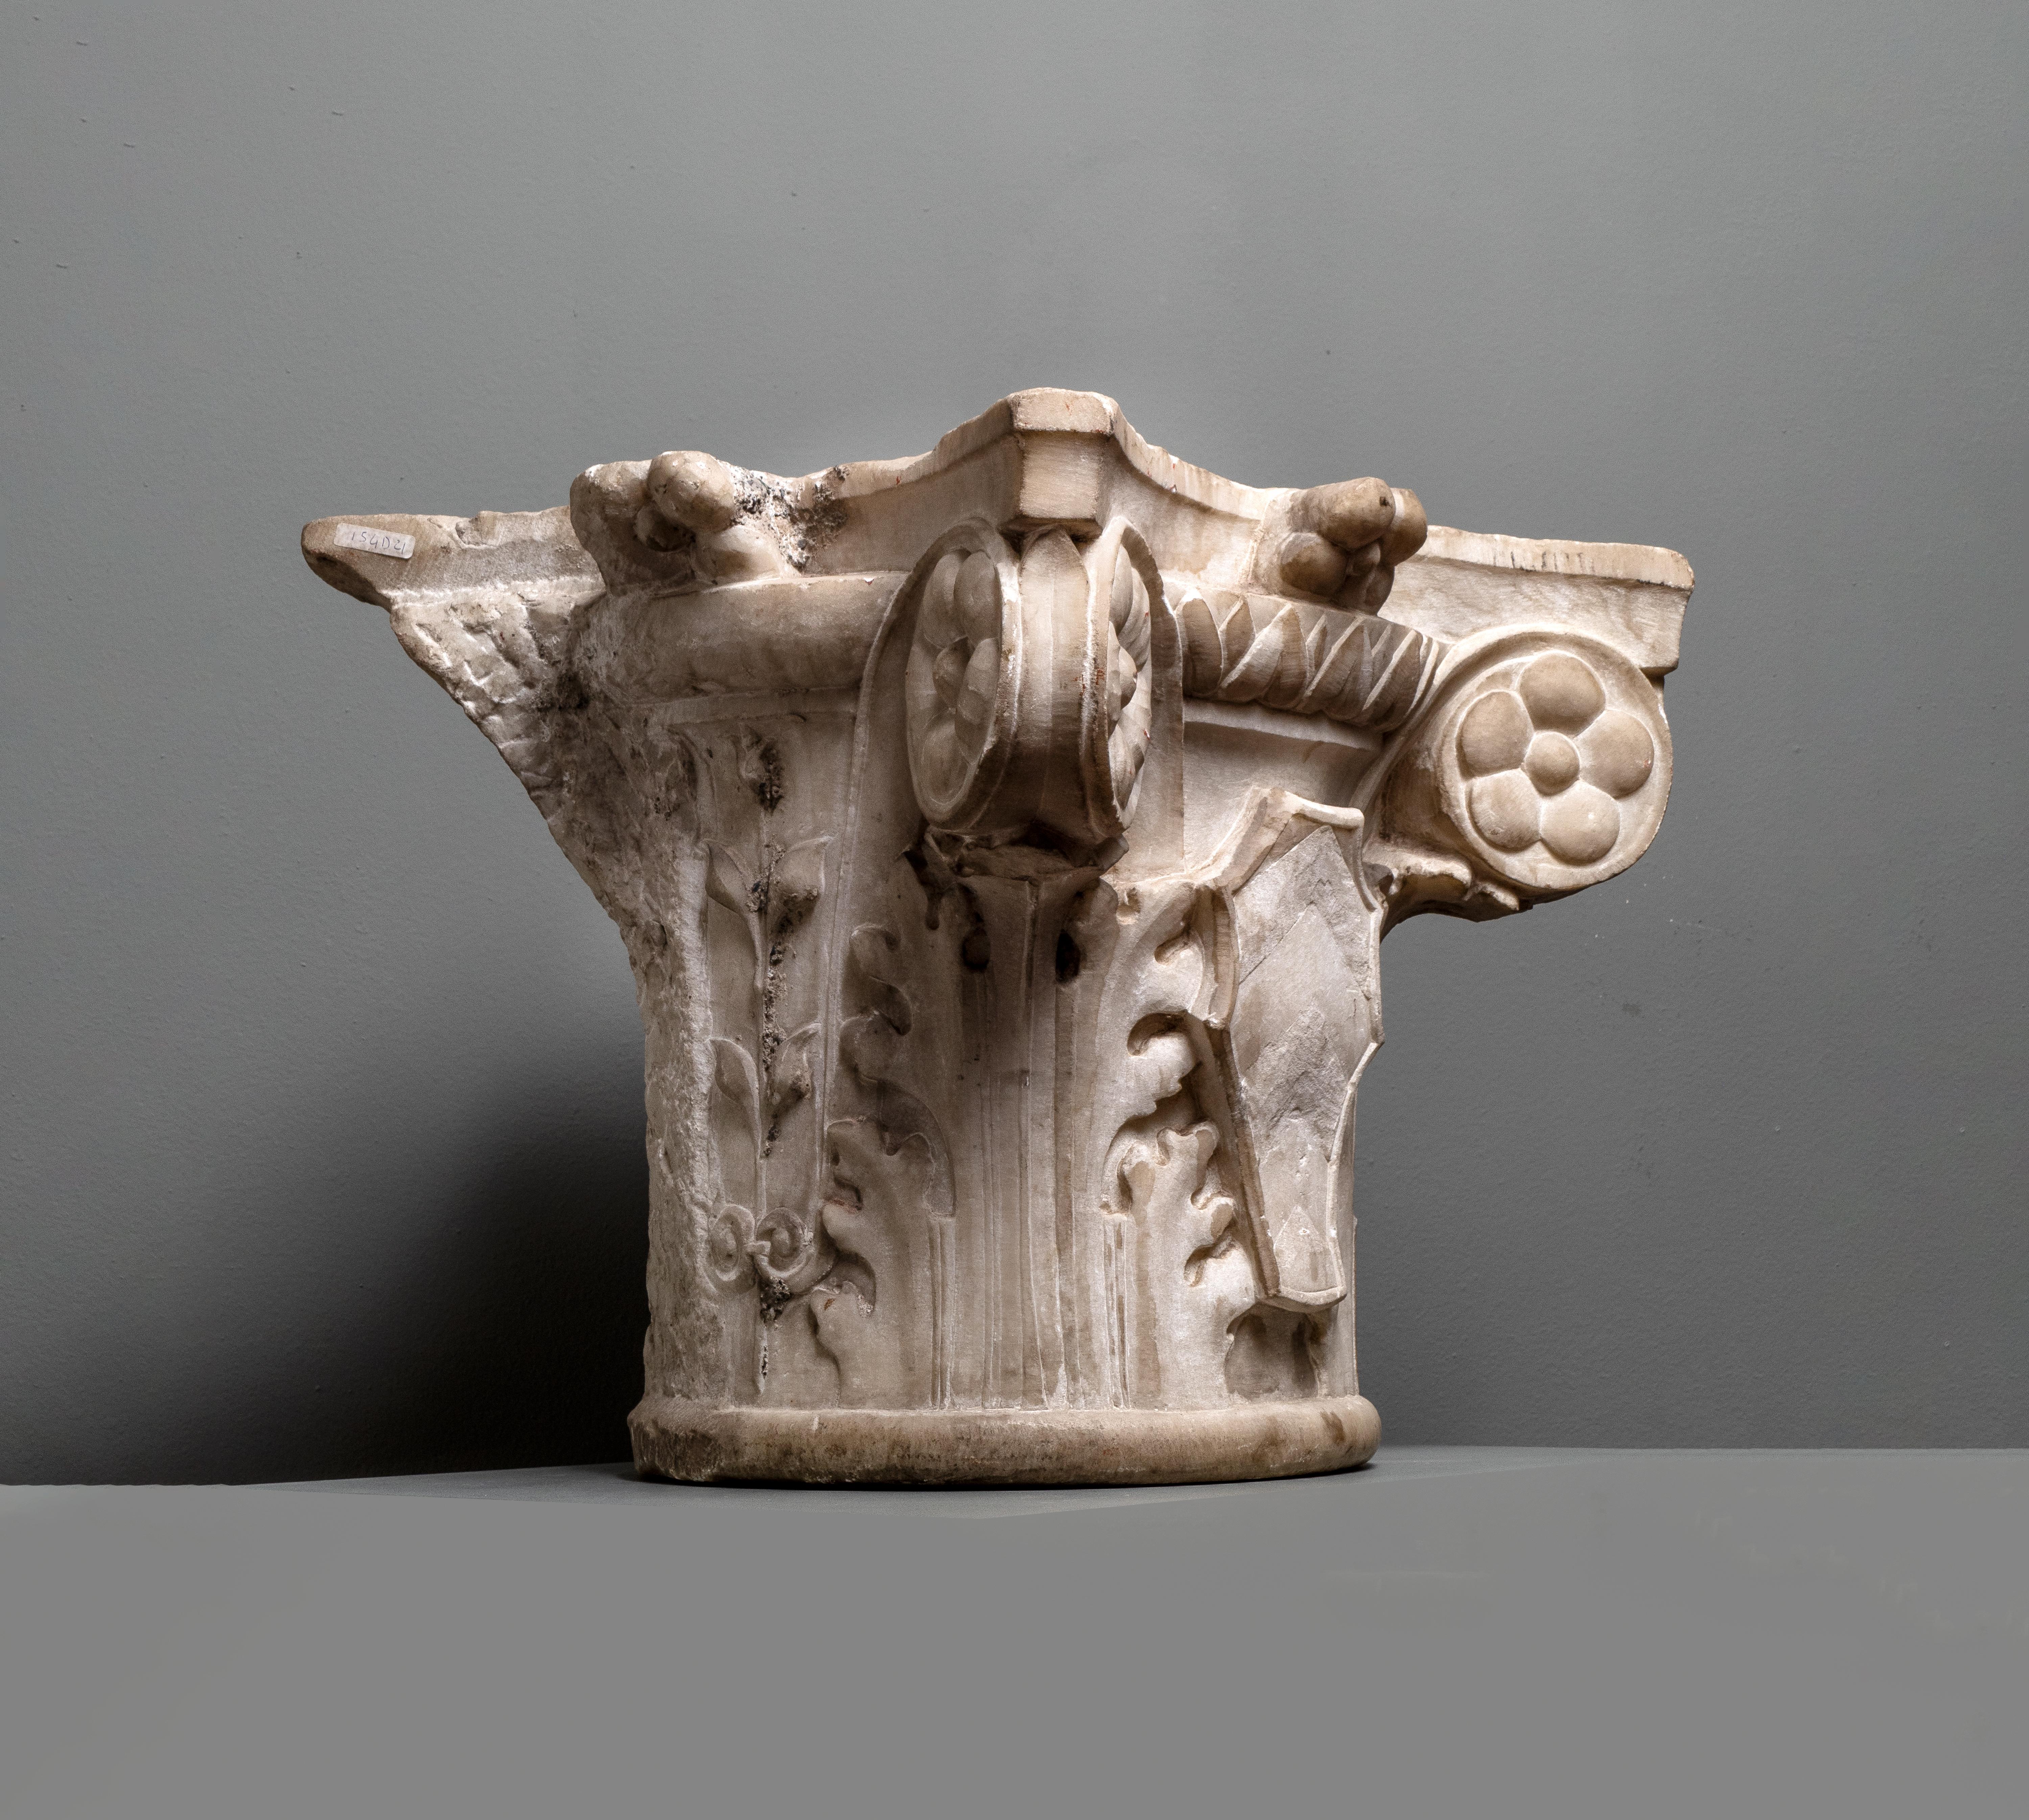 LARGE ITALIAN RENAISSANCE MARBLE CAPITAL
Florence, 15th/16th Century
marble
38 x 47 x 47 cm
15 x 18 1/2 x 18 1/2 in